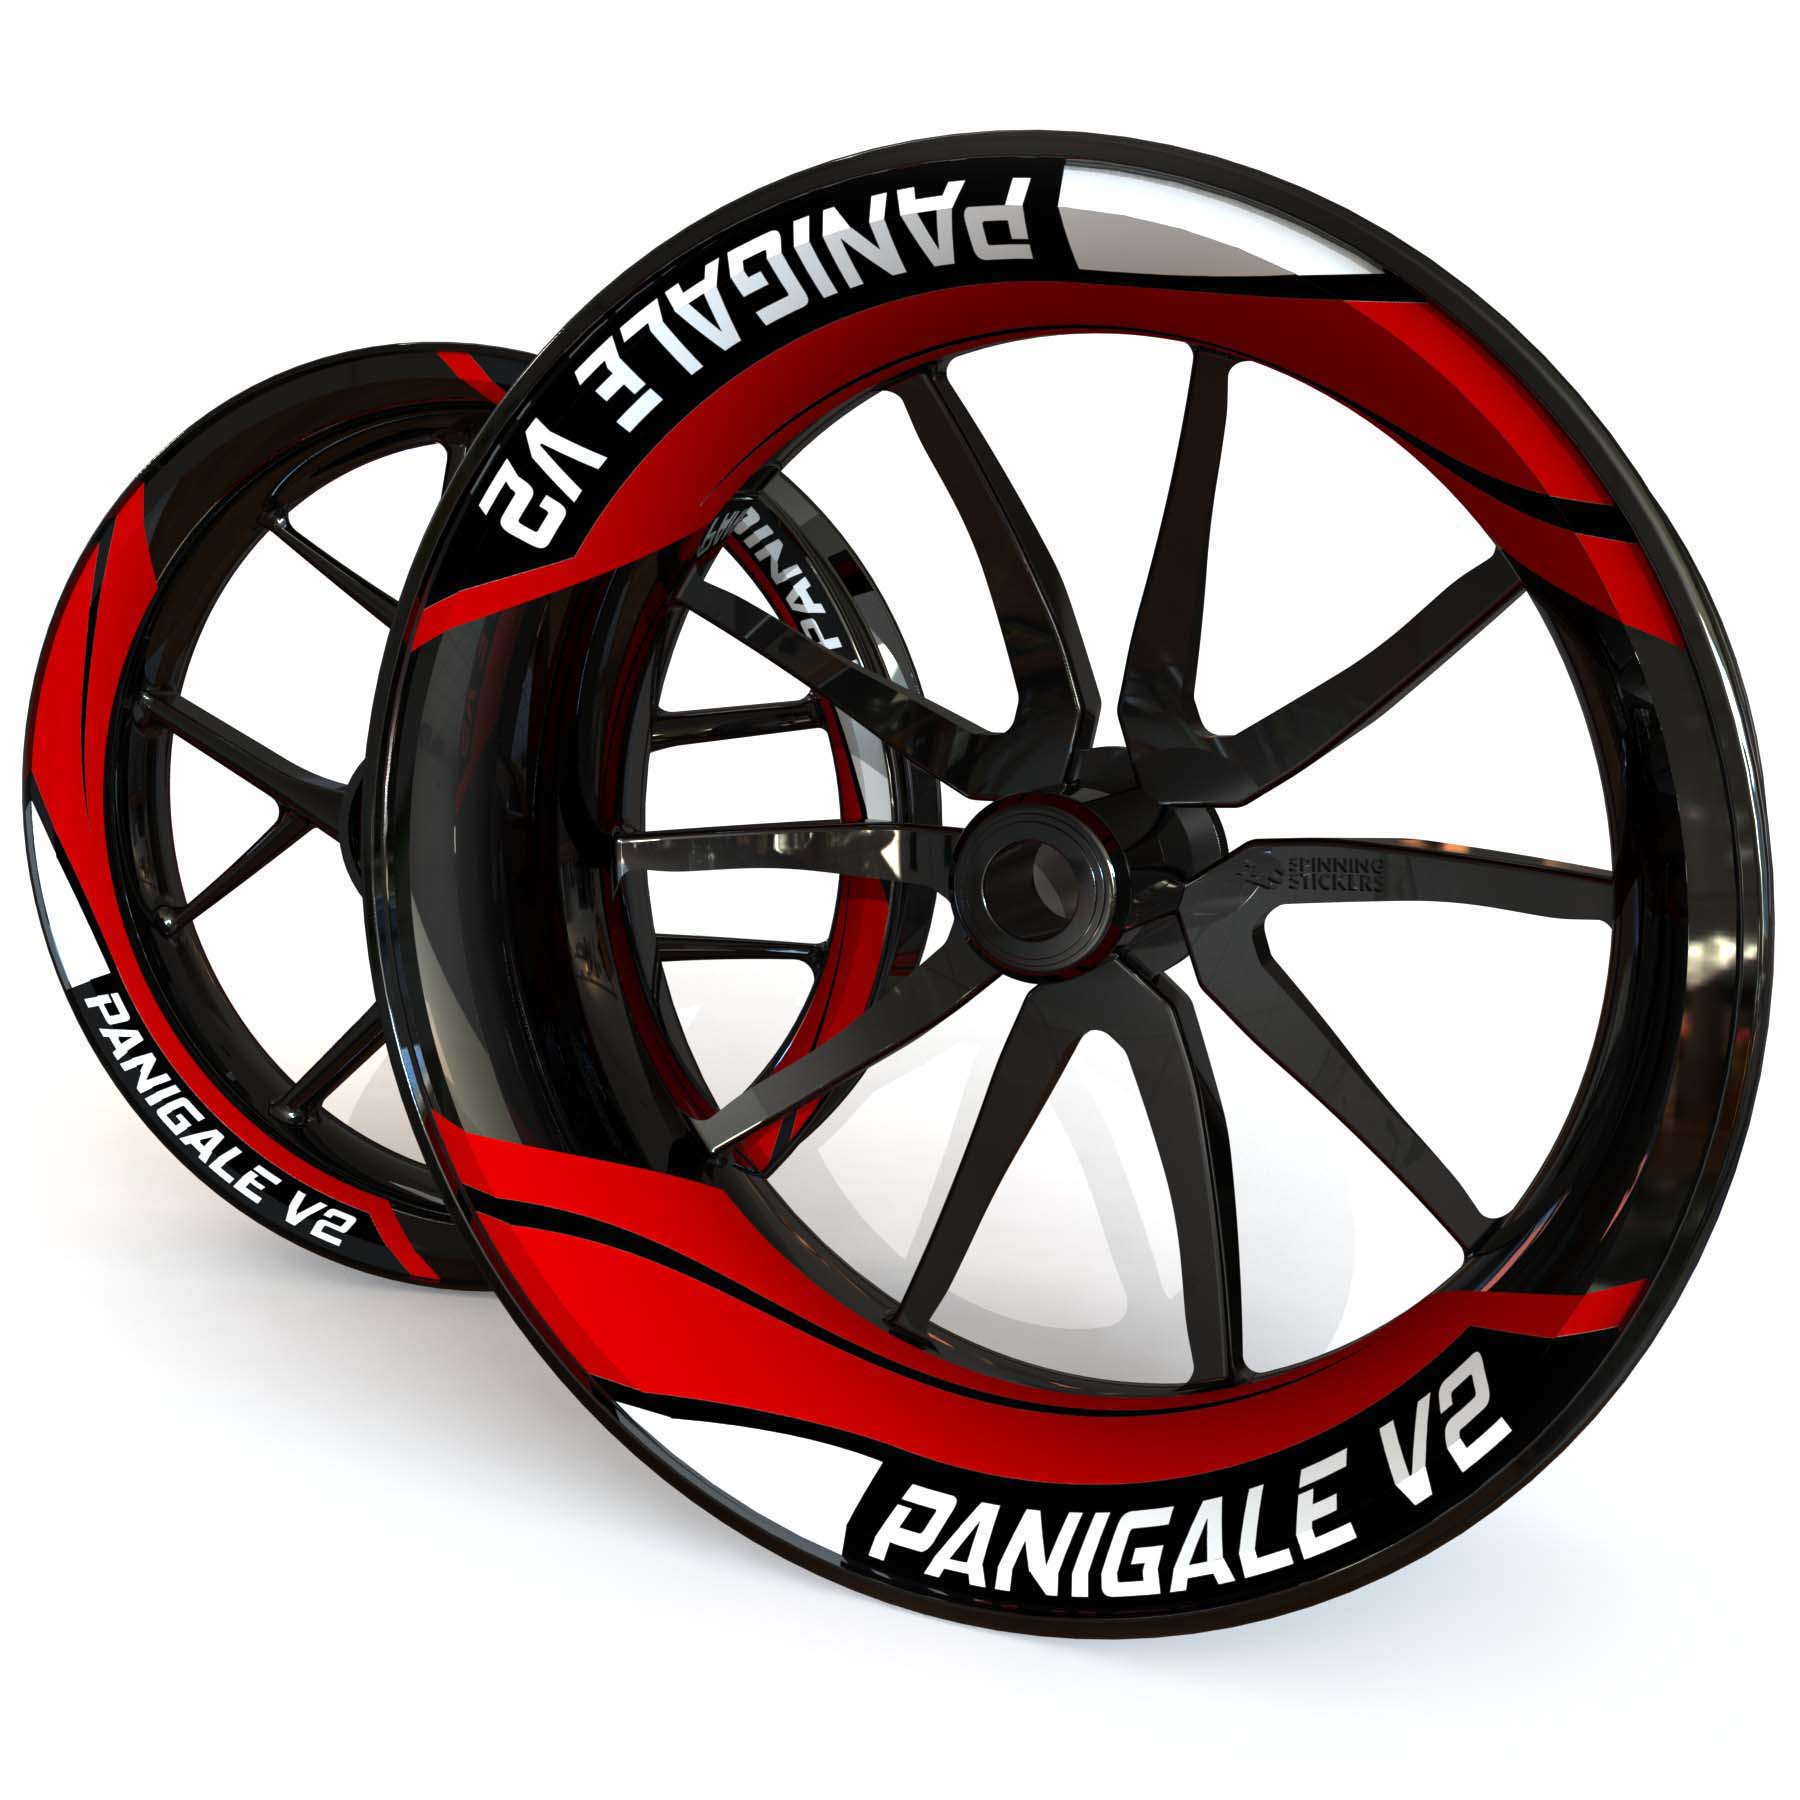 Ducati PANIGALE V2 Wheel Stickers kit - Two Piece Design